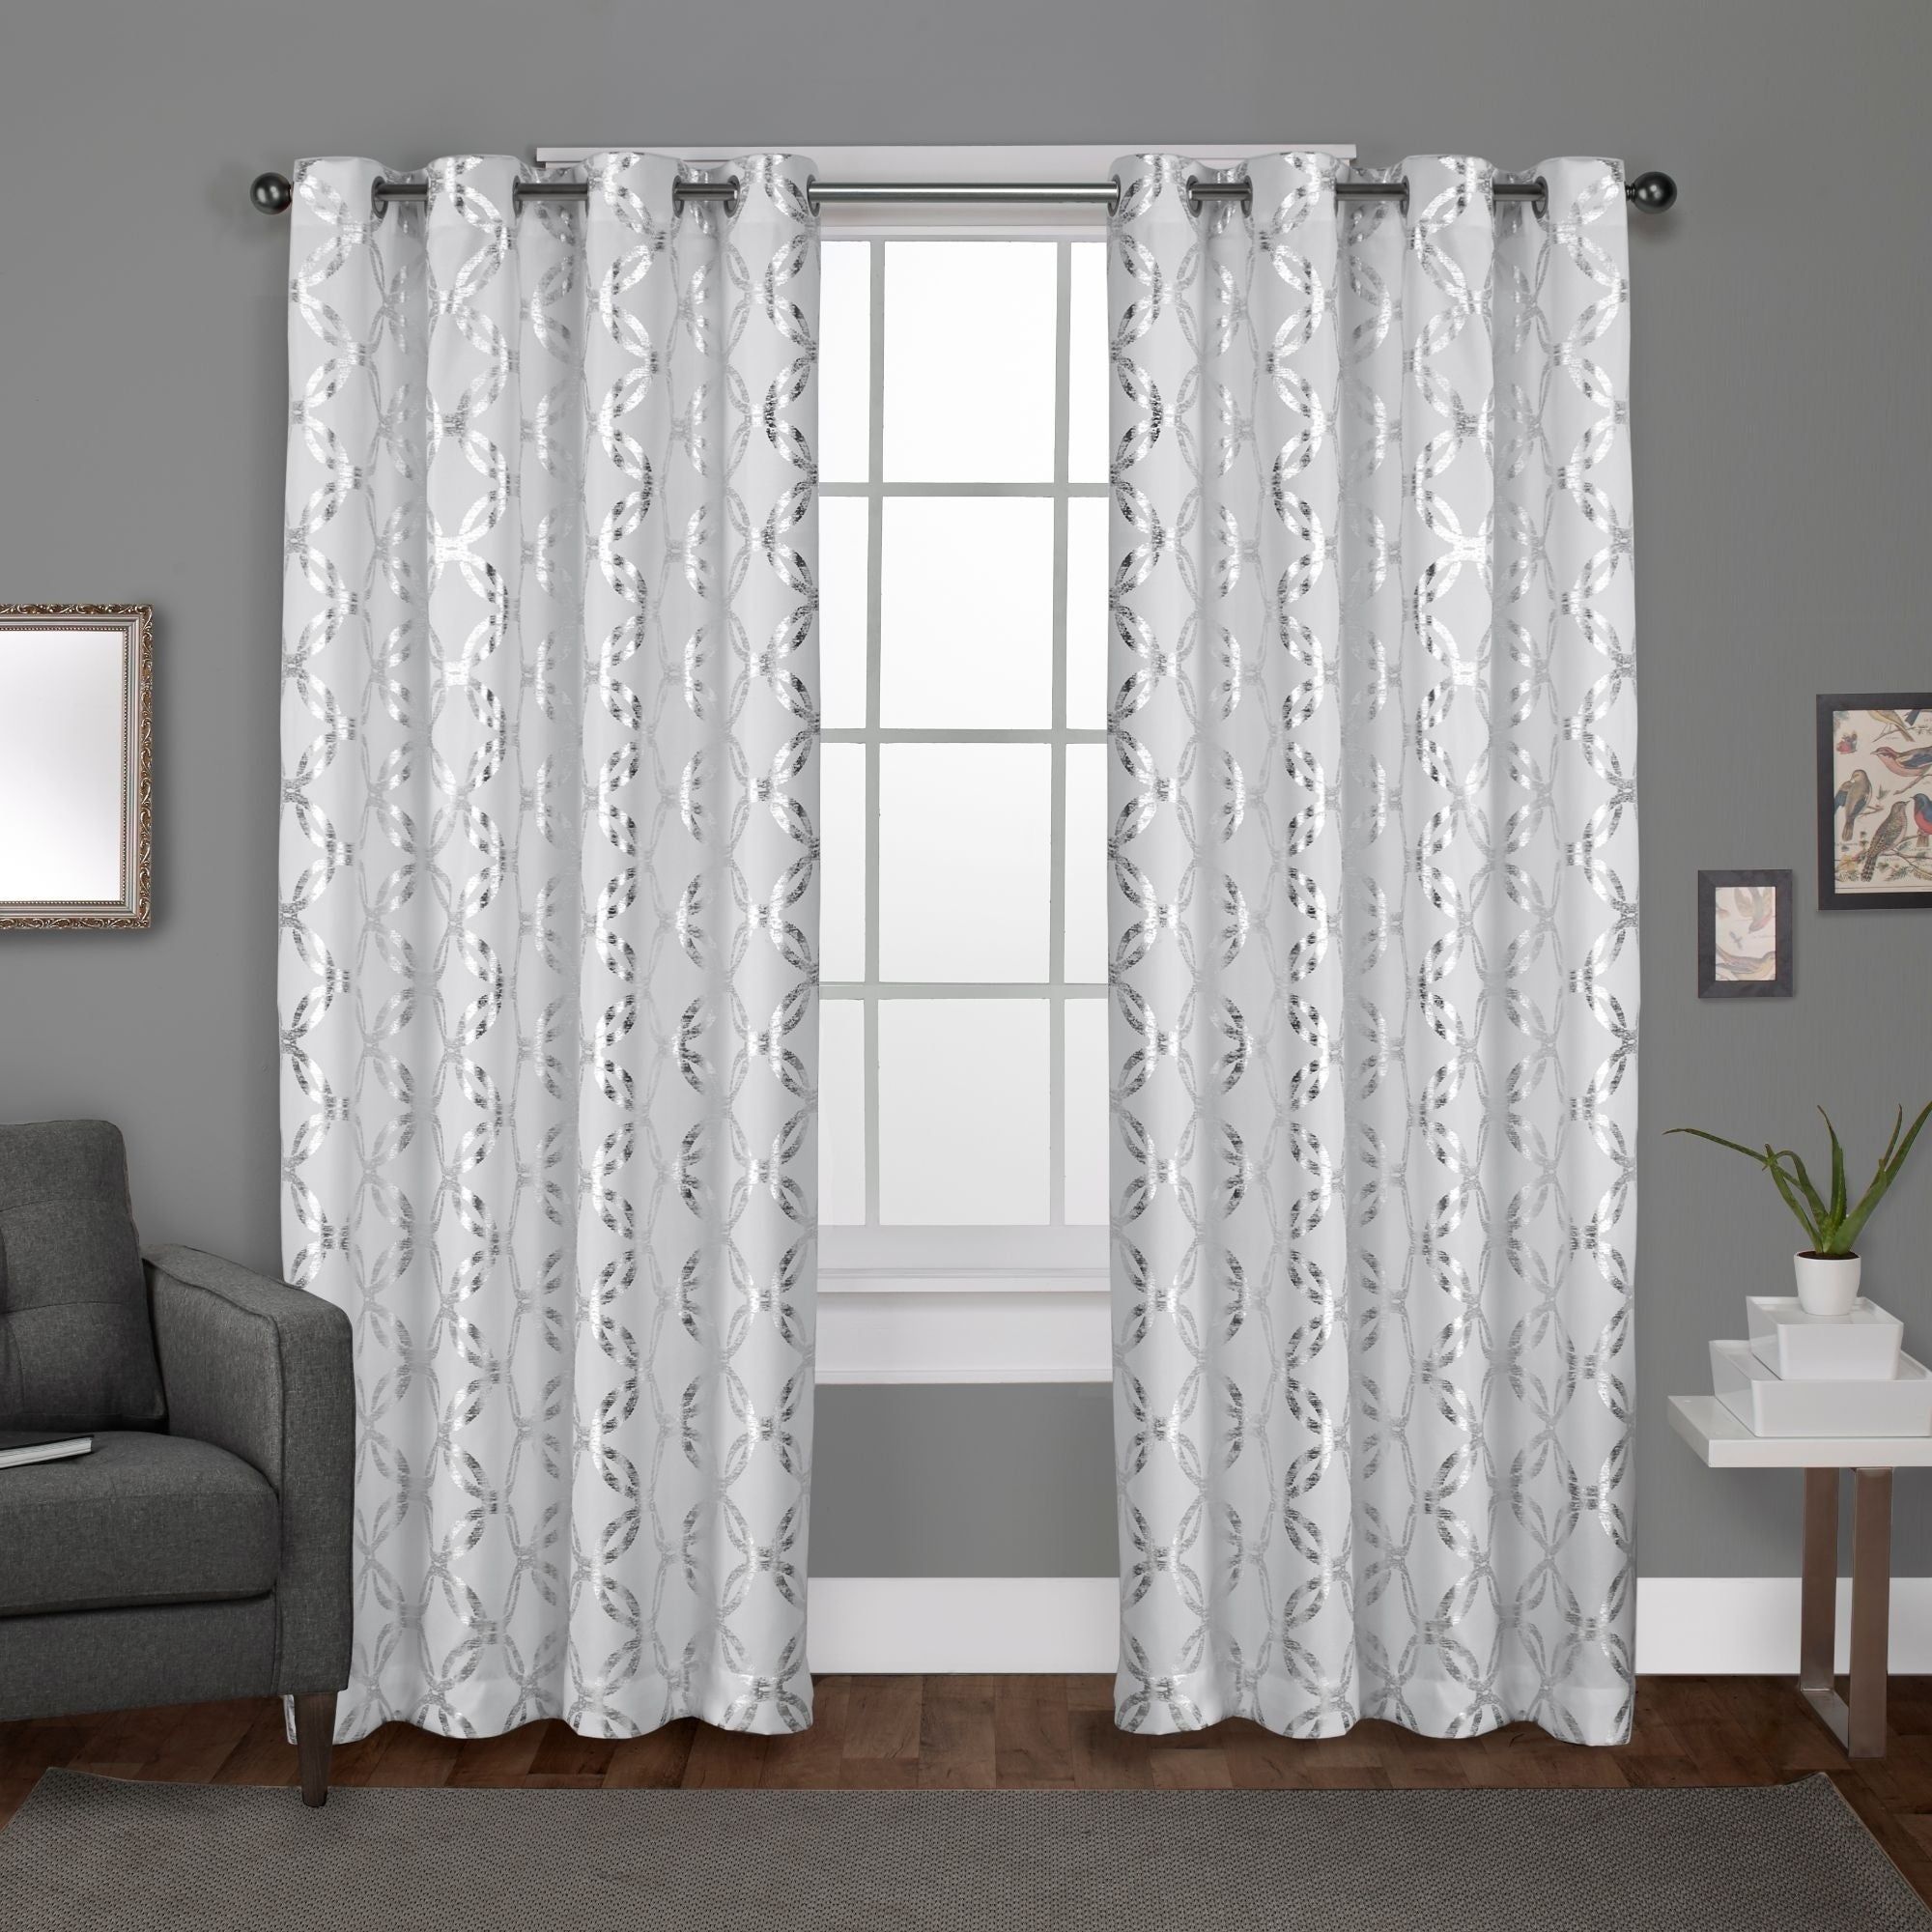 The Curated Nomad Sloat Metallic Geometric Grommet Top Curtain Panel Pair With Regard To The Curated Nomad Duane Blackout Curtain Panel Pairs (View 26 of 30)